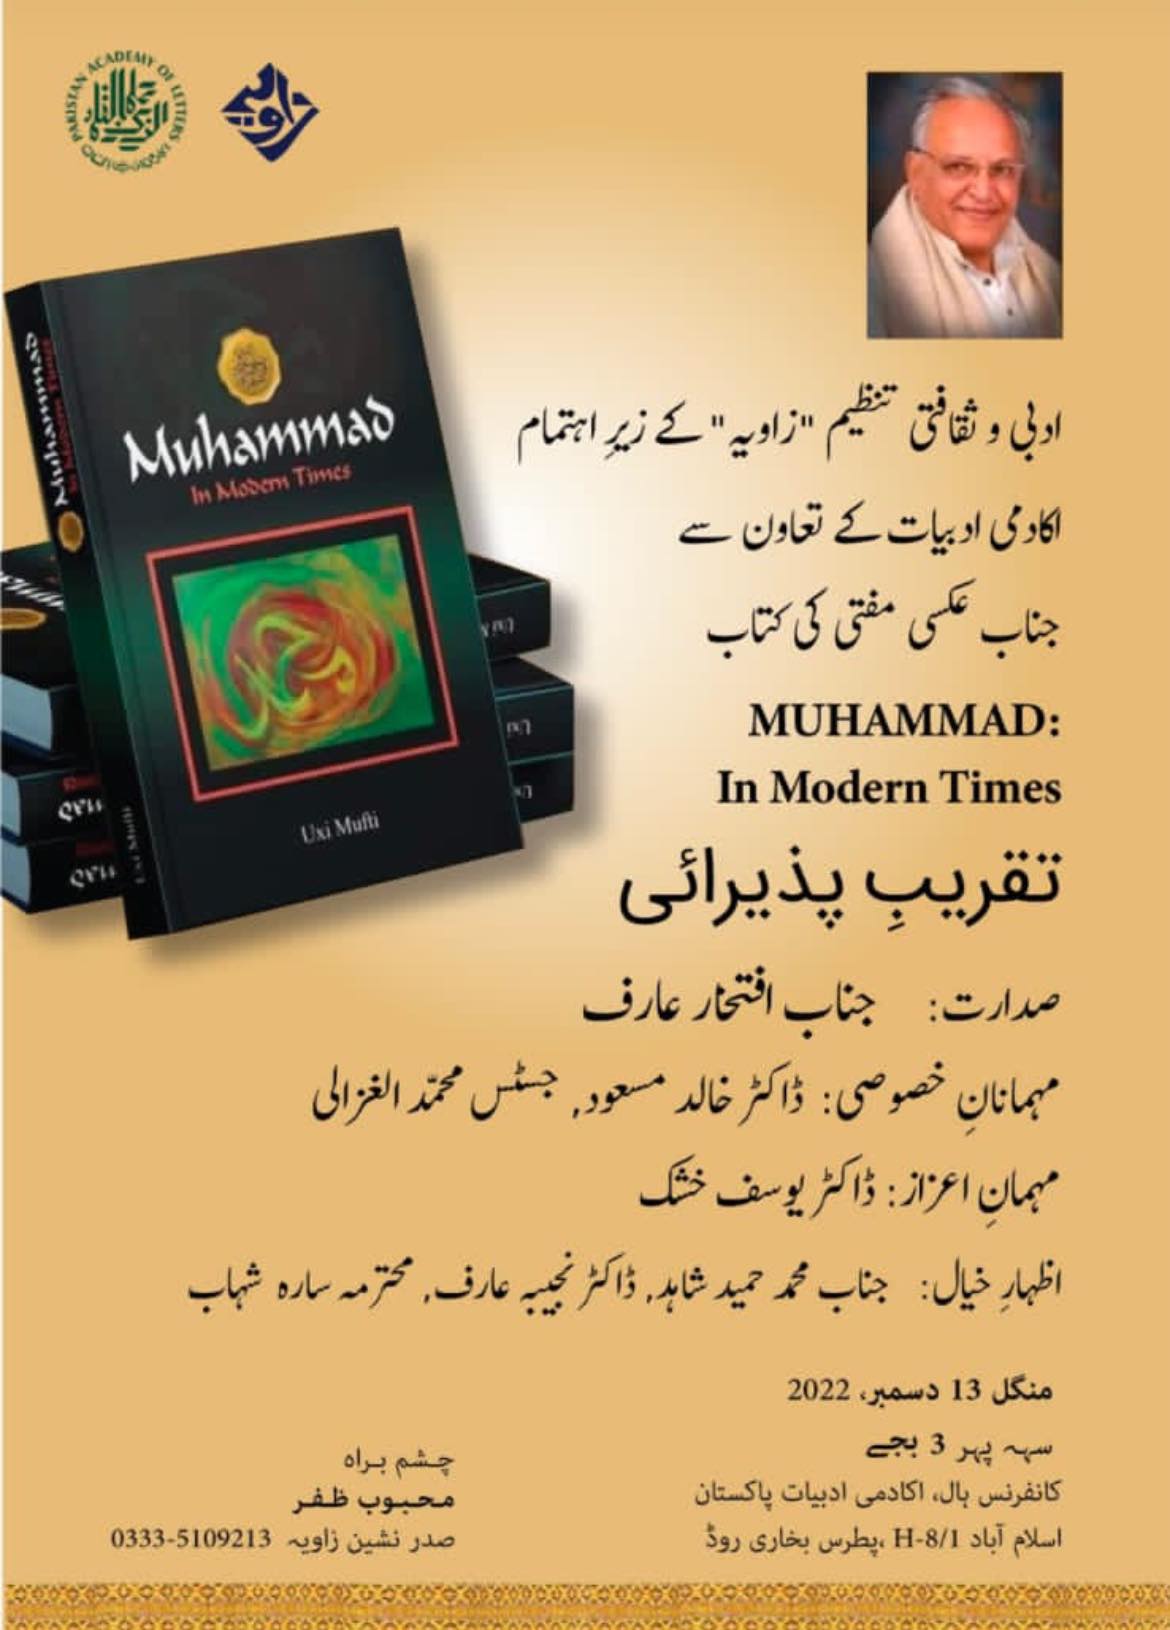 Book 'Muhammad (PBUH) in Modern Times' launched